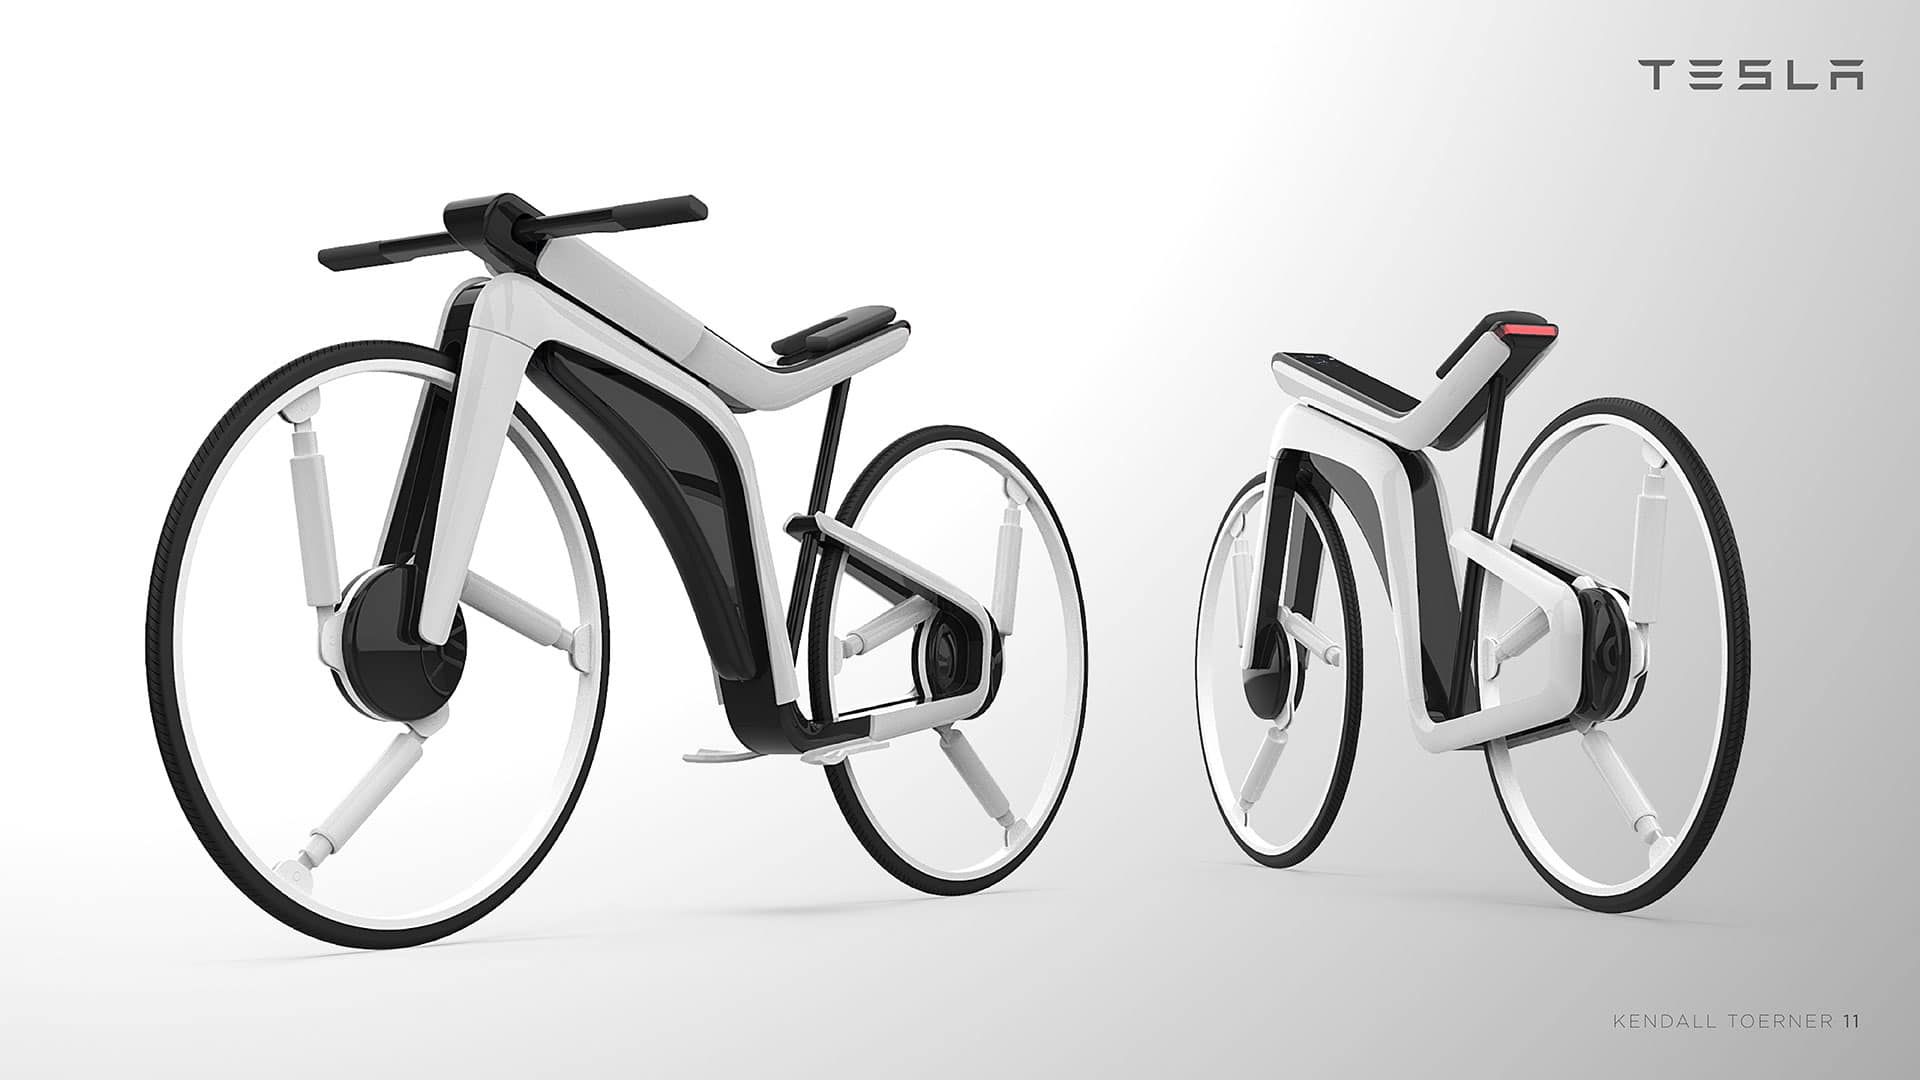 Tesla Model B, a futuristics electric bicycle concept by Kendall Toerner.